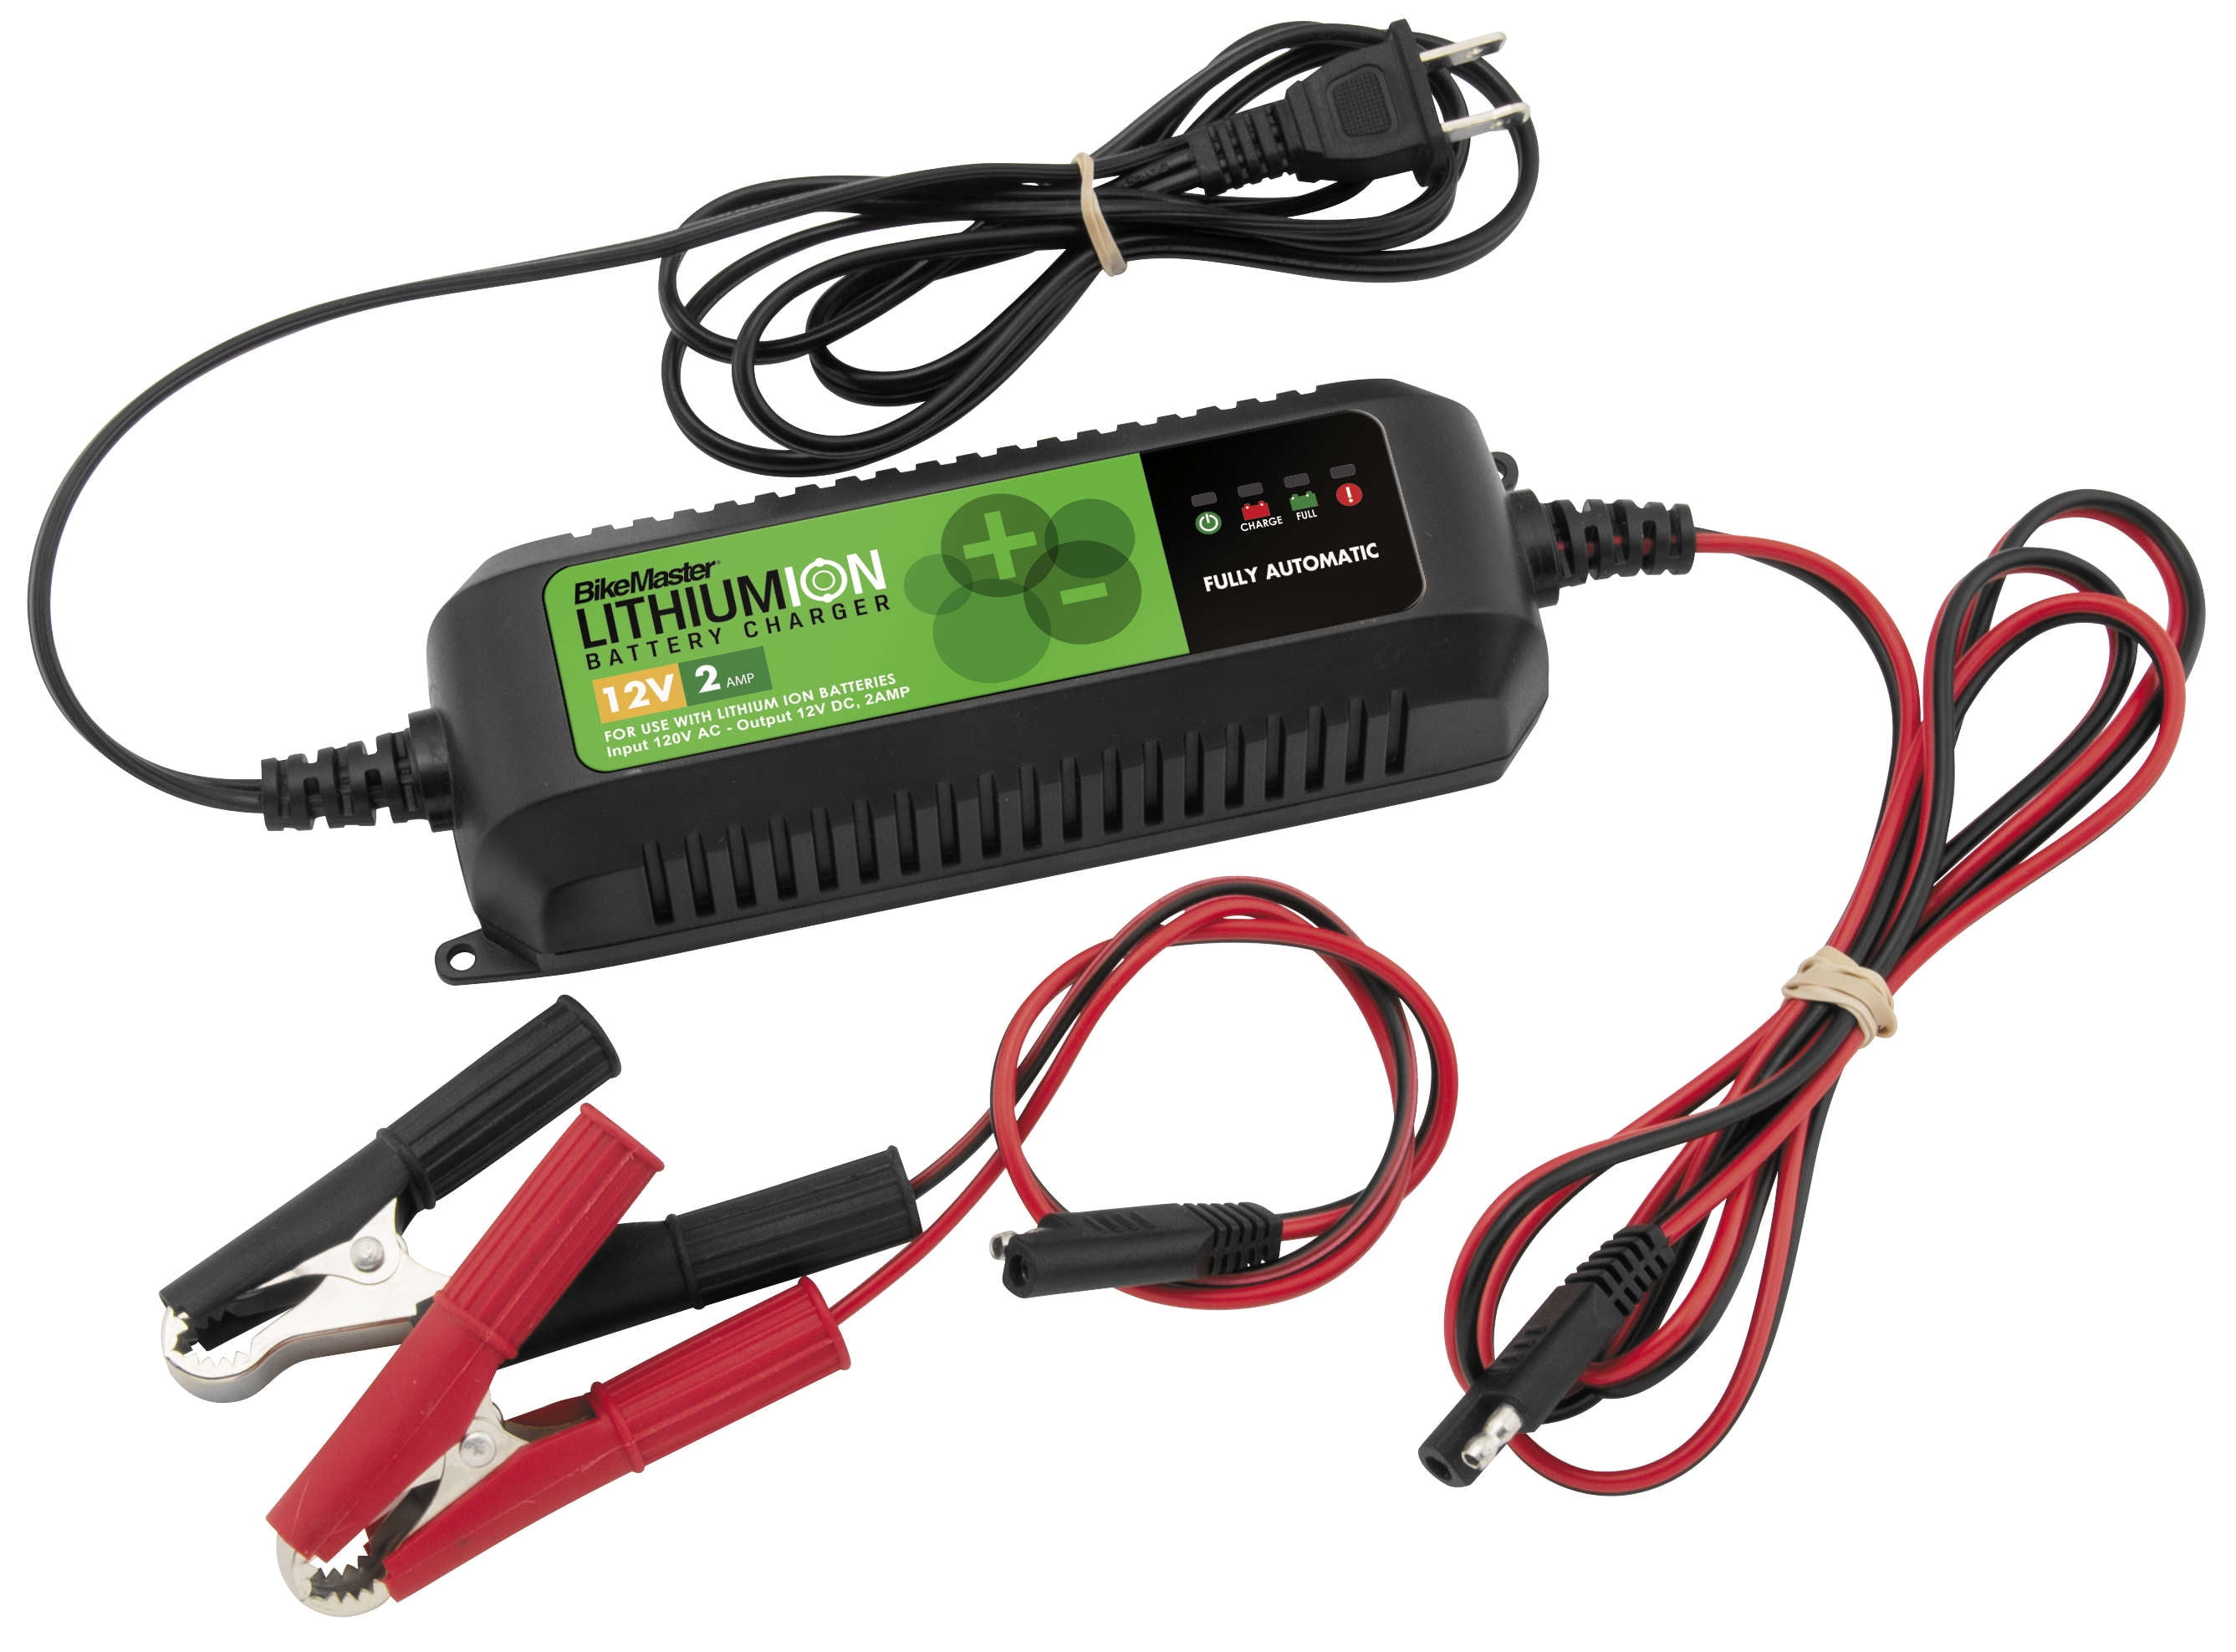 Duracell DRMC4A 6V/12V/Lithium Ion 4 Amp Battery Charger Maintainer with LCD Display 